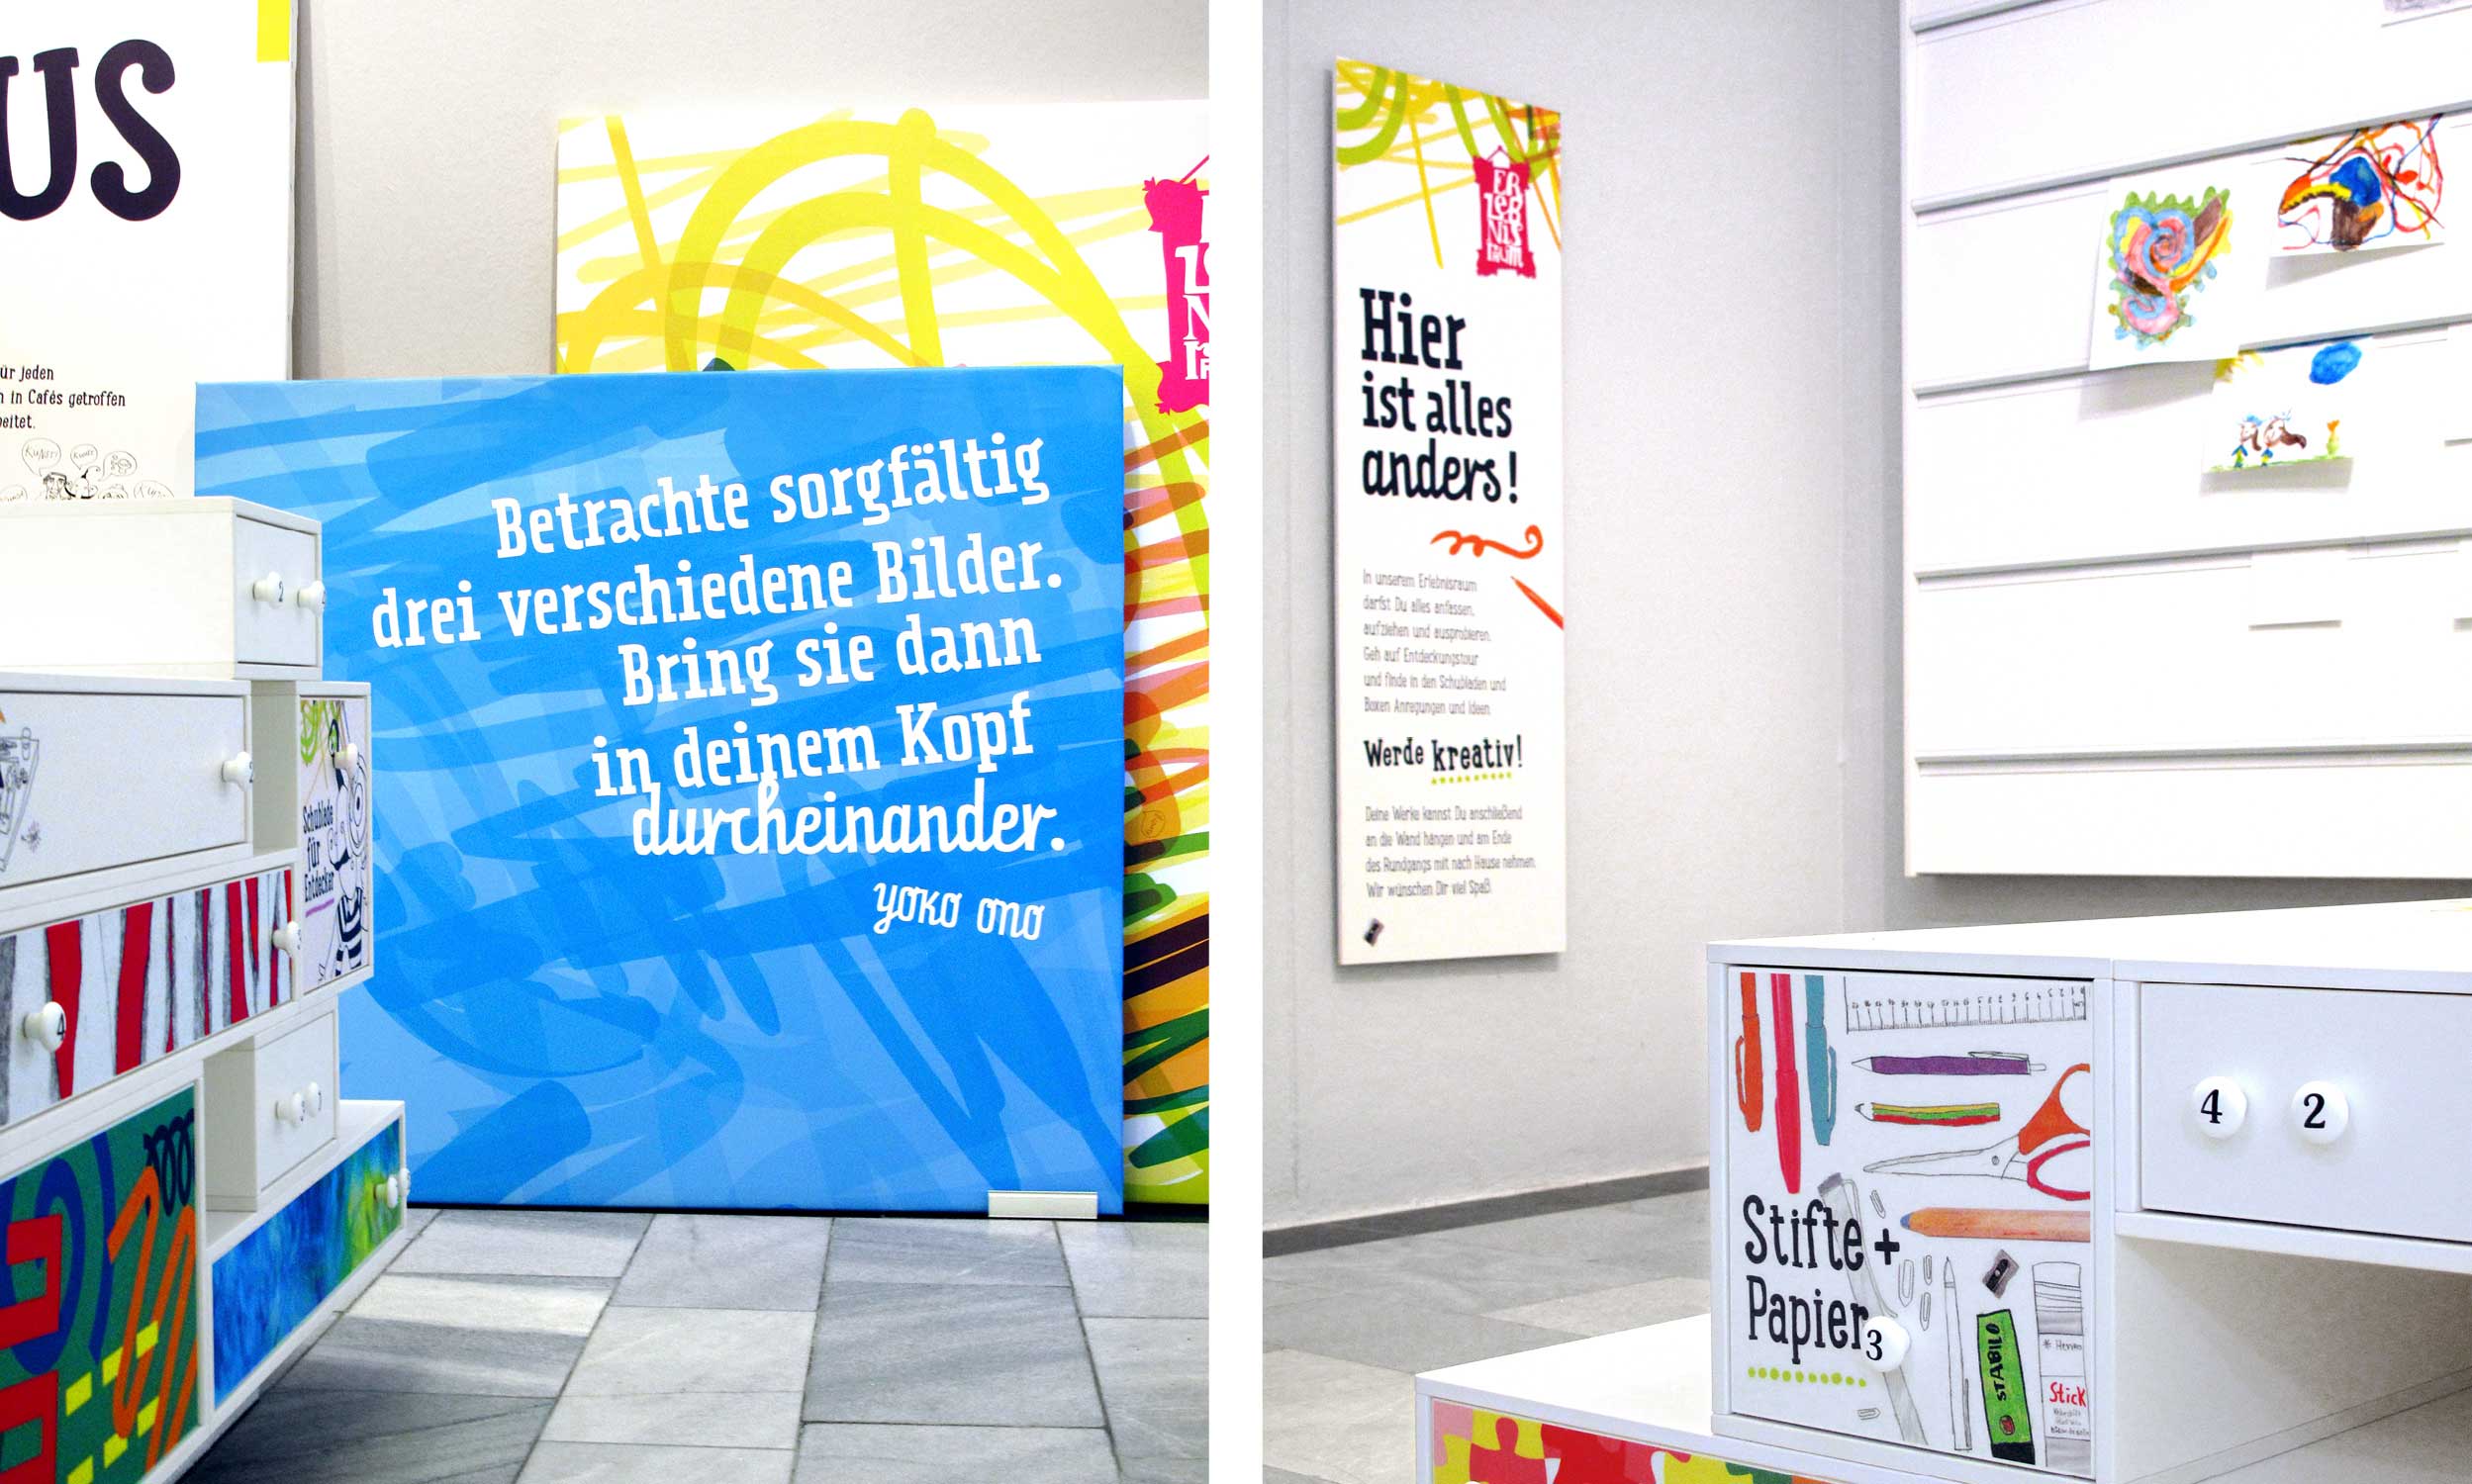 Two detail shots of the experience space. In the first image, a blue, square canvas is in focus, presenting a quote by the artist Yoko Ono in a white, diagonally arranged, cheerful typeface. Behind the blue canvas, a slightly higher canvas can be seen. It is printed with colourful scribbles. On the left in the foreground, a corner of the chest of drawers with many colourful drawers can be seen. The second picture shows another section of the room. An oblong board in portrait format with text information in a cheerful font, decorated with colourful graphic elements, is mounted on the wall on the left. On the right side of the wall is a white pin board, decorated with some children's drawings. In the foreground, a drawer is in focus, decorated with illustrations of pens, scissors, glue sticks and other office supplies. Inside, the children find all kinds of pens and paper tools.